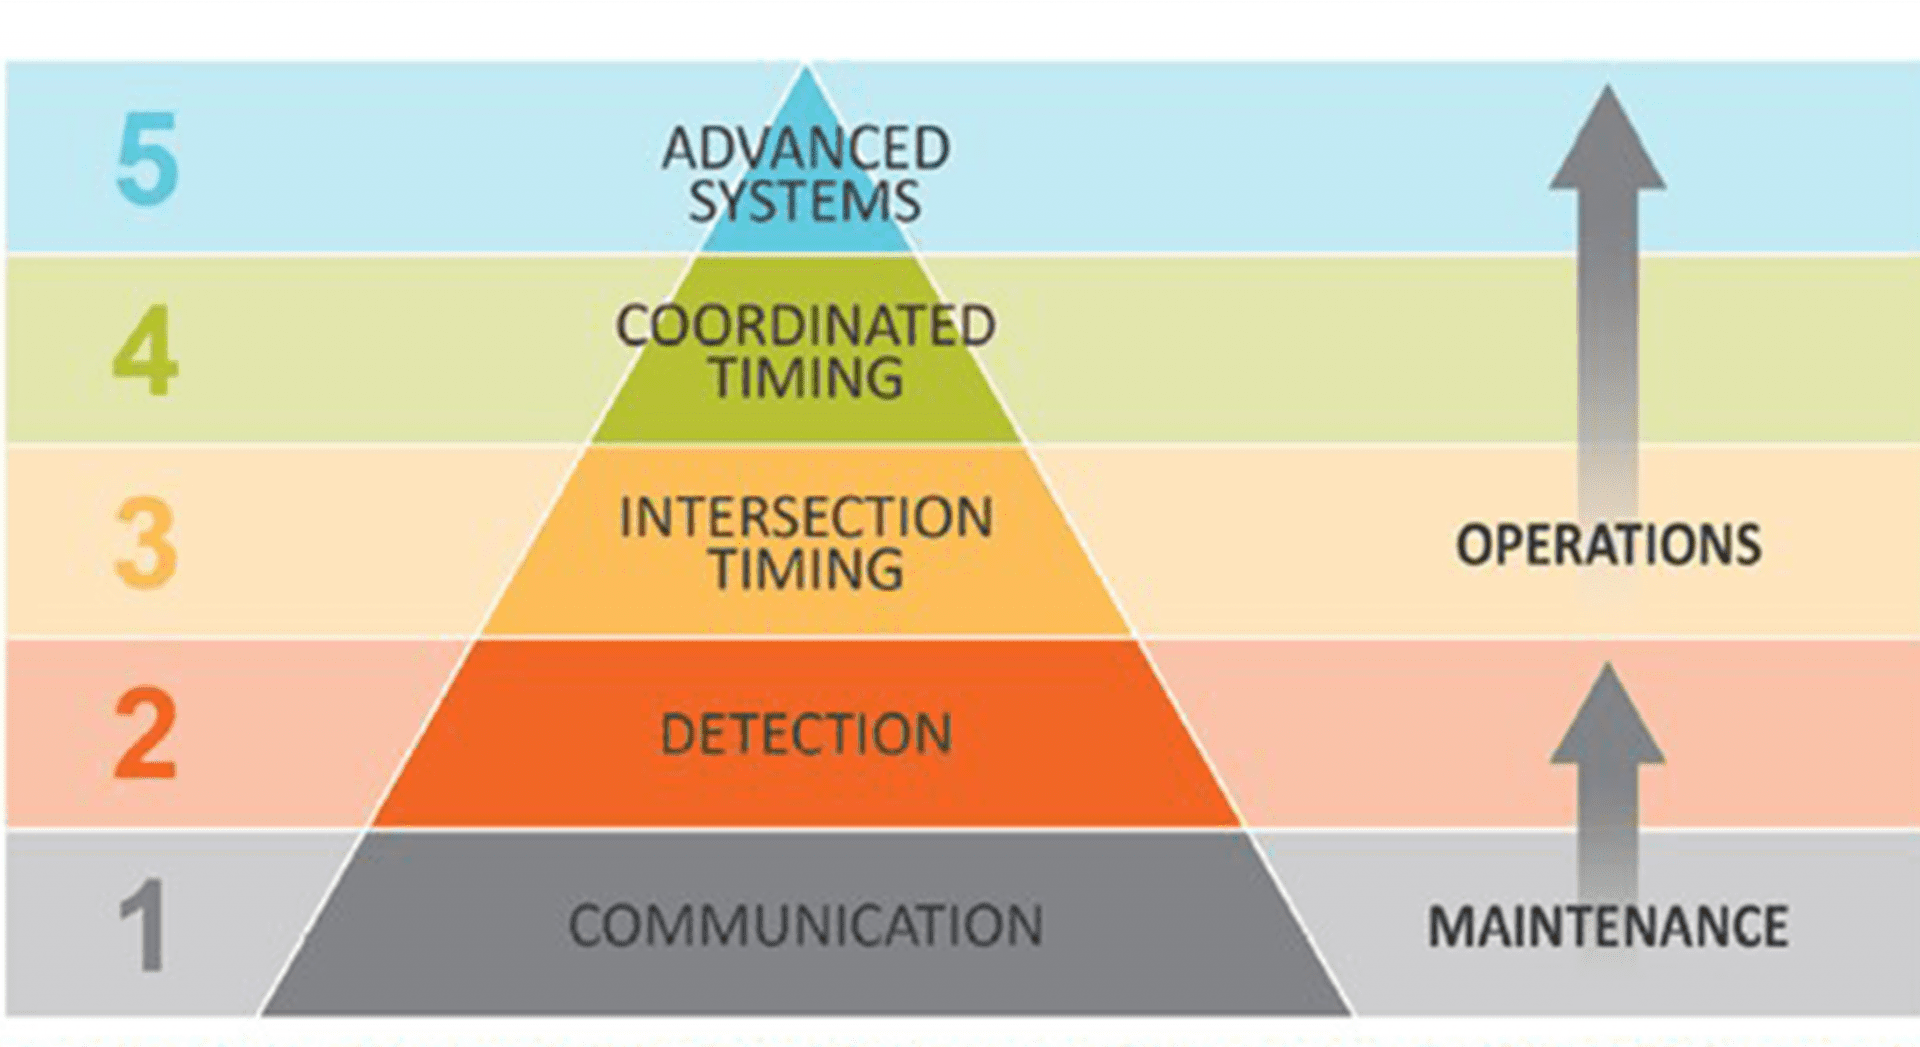 The conceptual hierarchy of needs for traffic signal systems